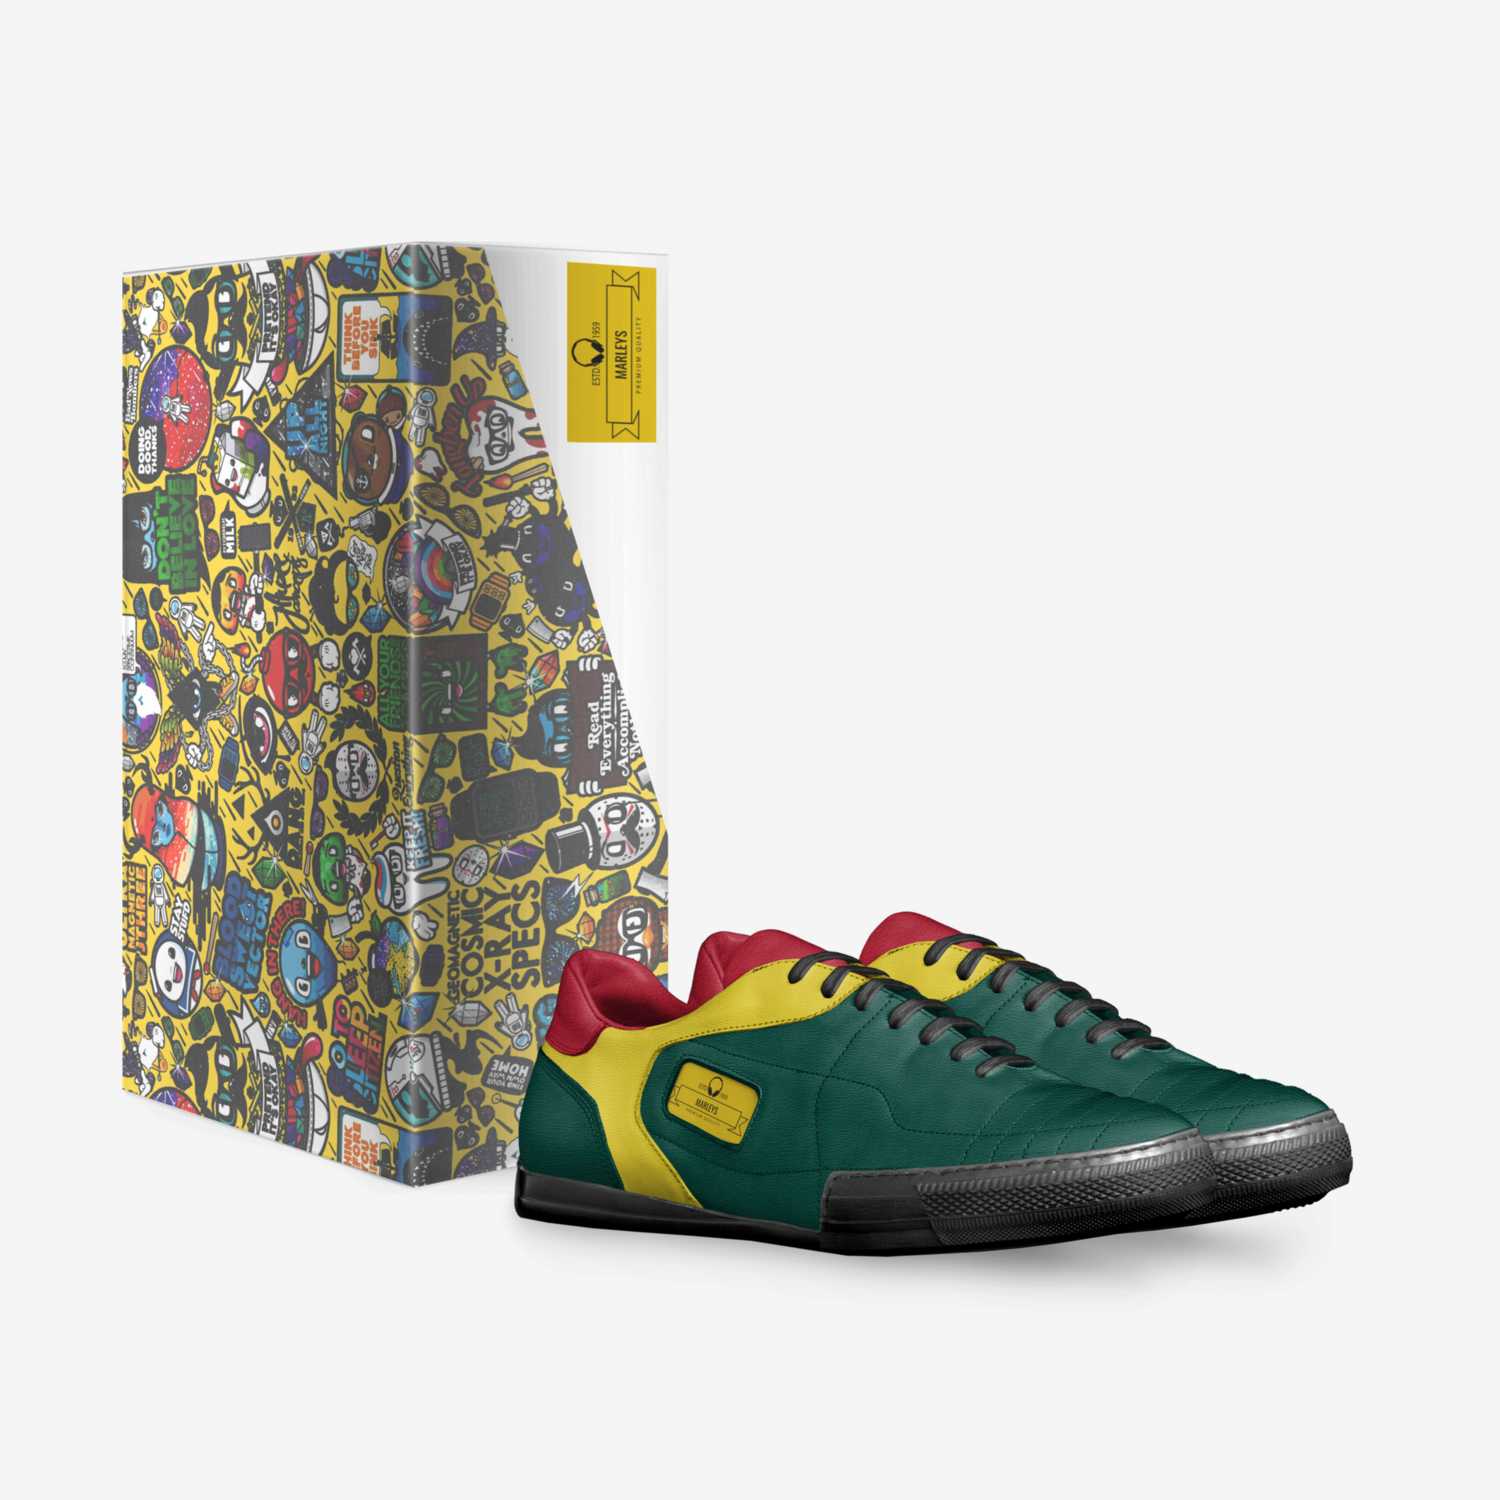 Marleys custom made in Italy shoes by Alex T | Box view